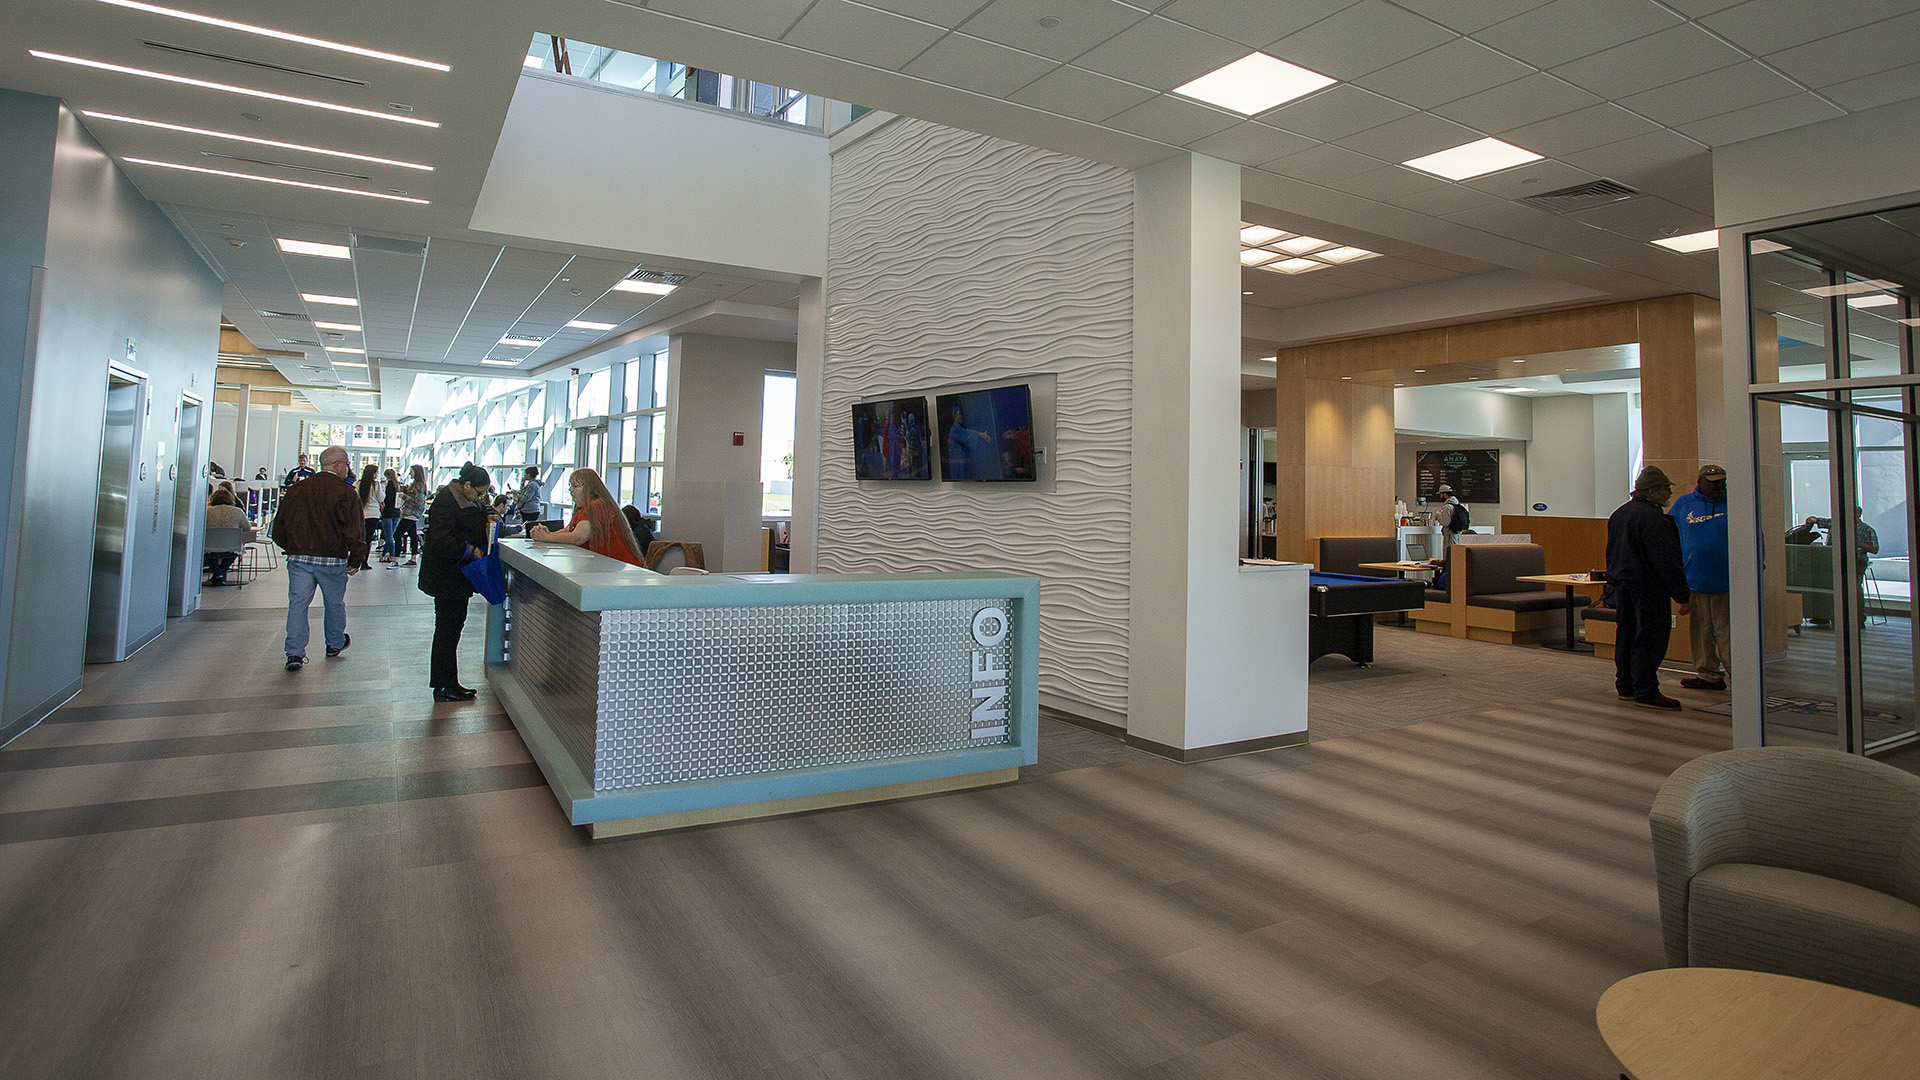 Reception area of the student union with its welcome desk